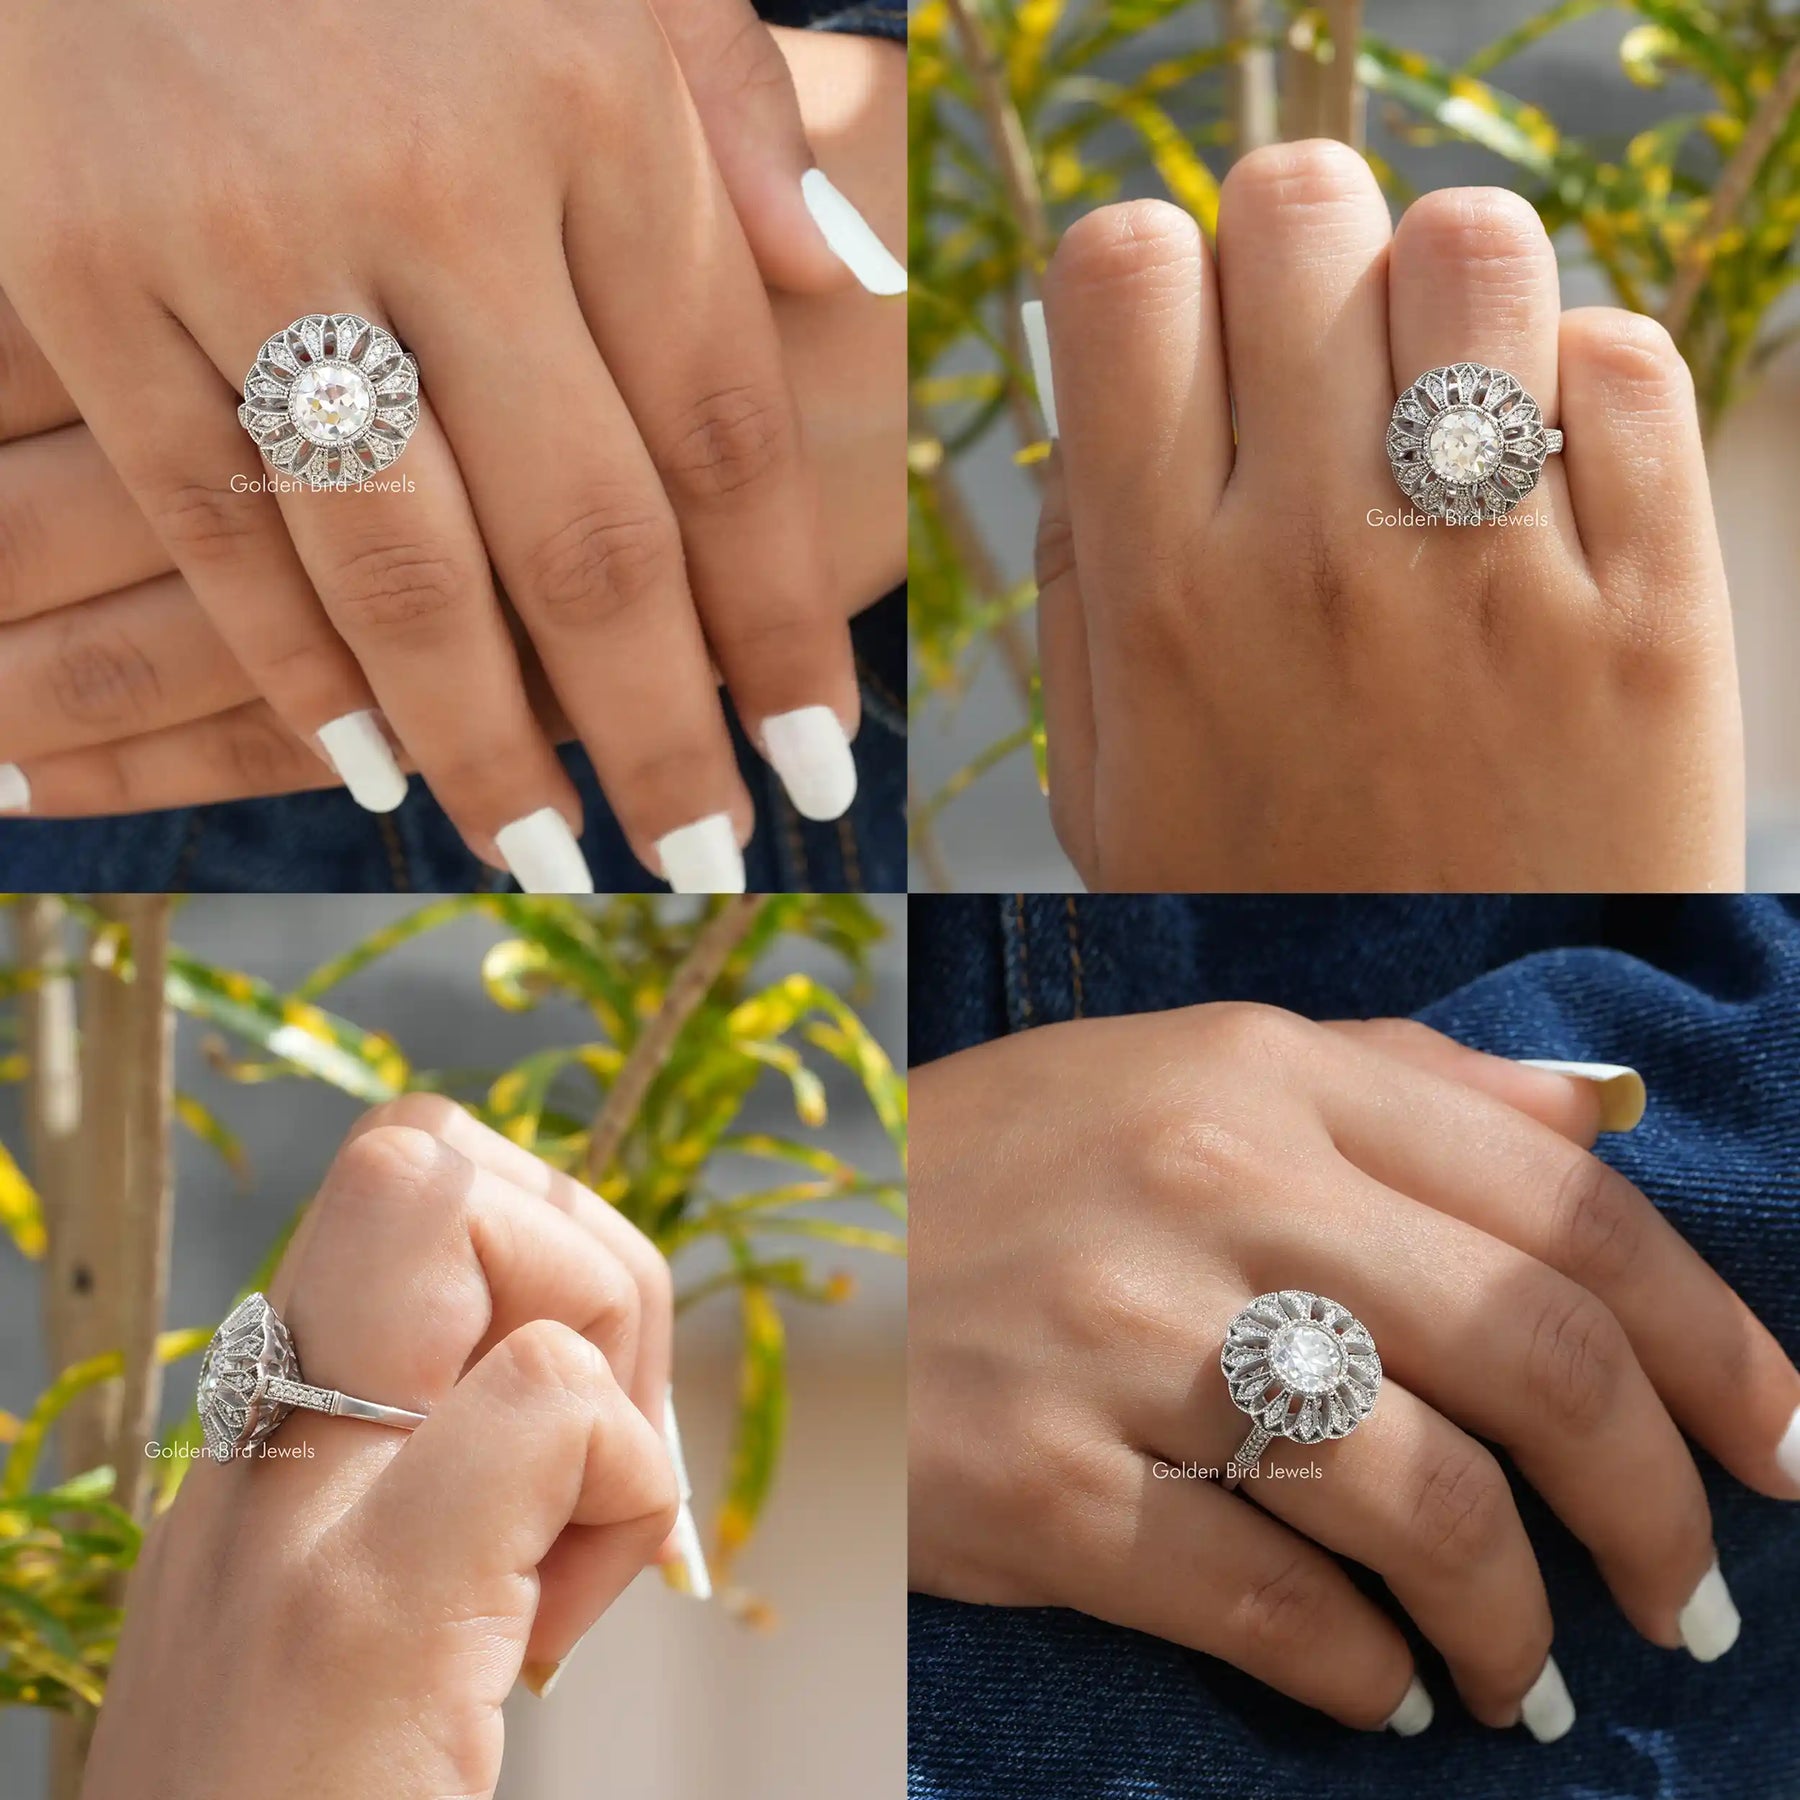 Old European Round Cut Floral Style Vintage Ring